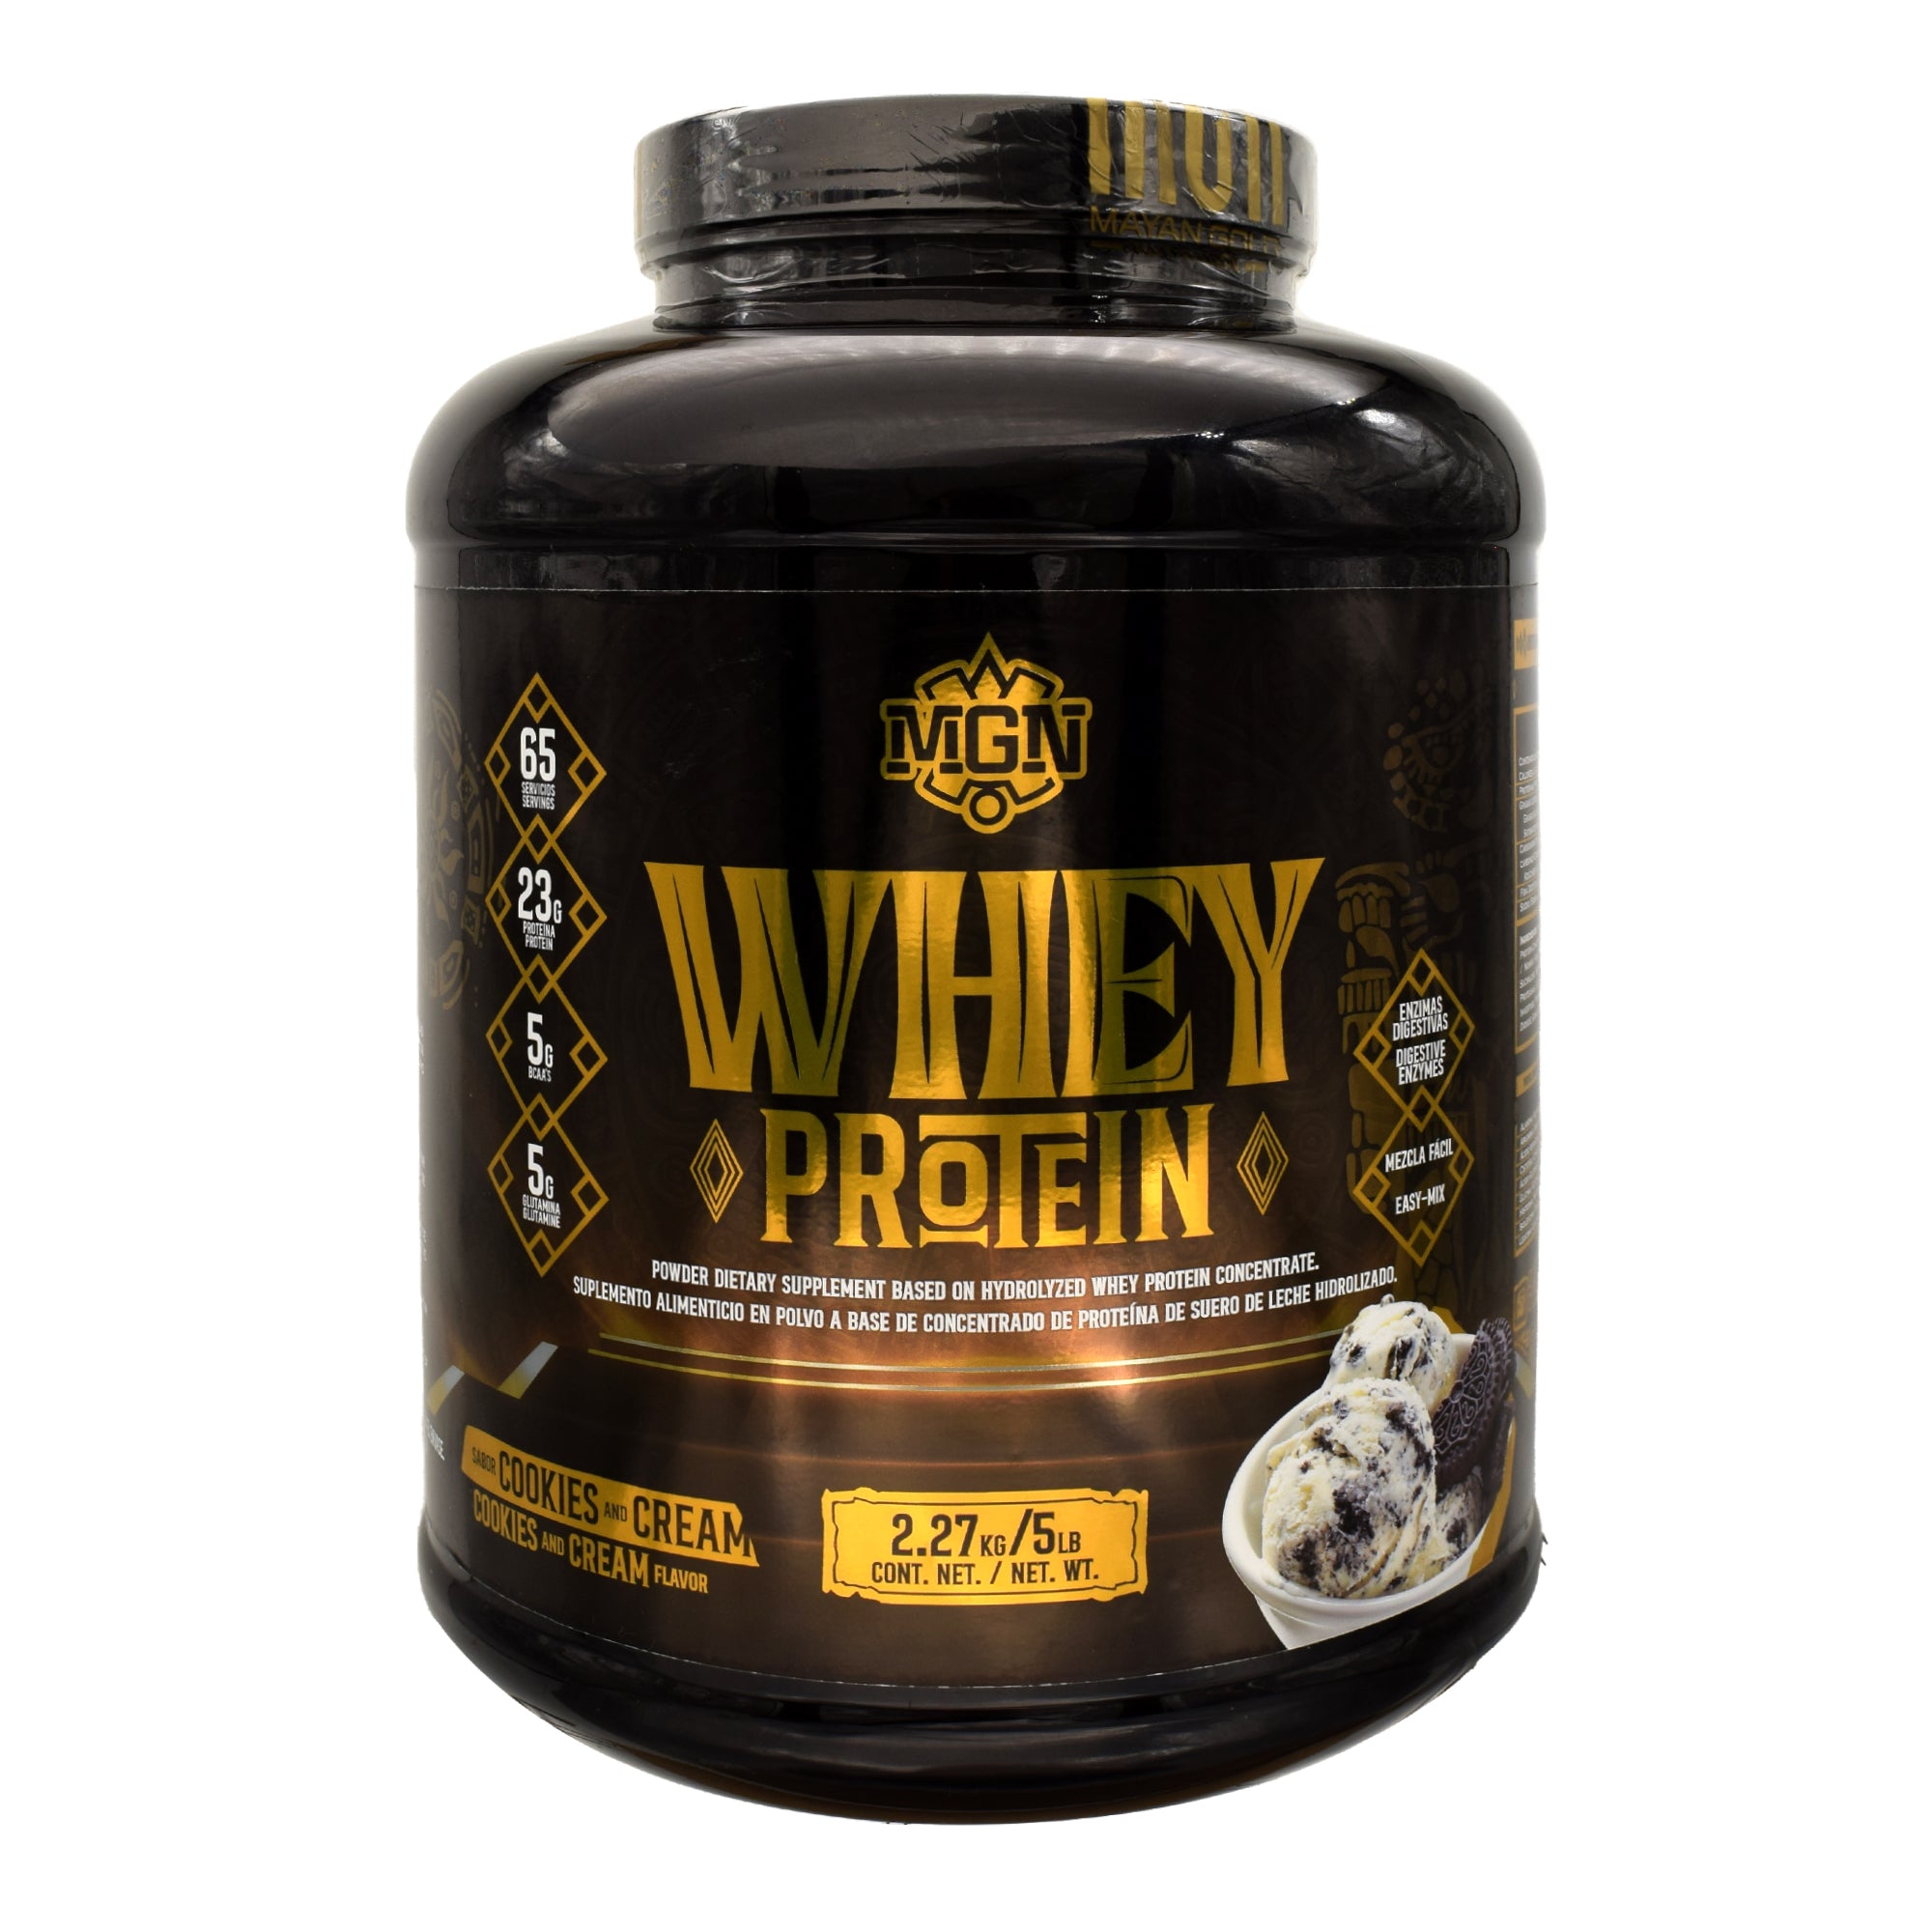 WHEY PROTEIN COOKIES AND CREAM 5 LB